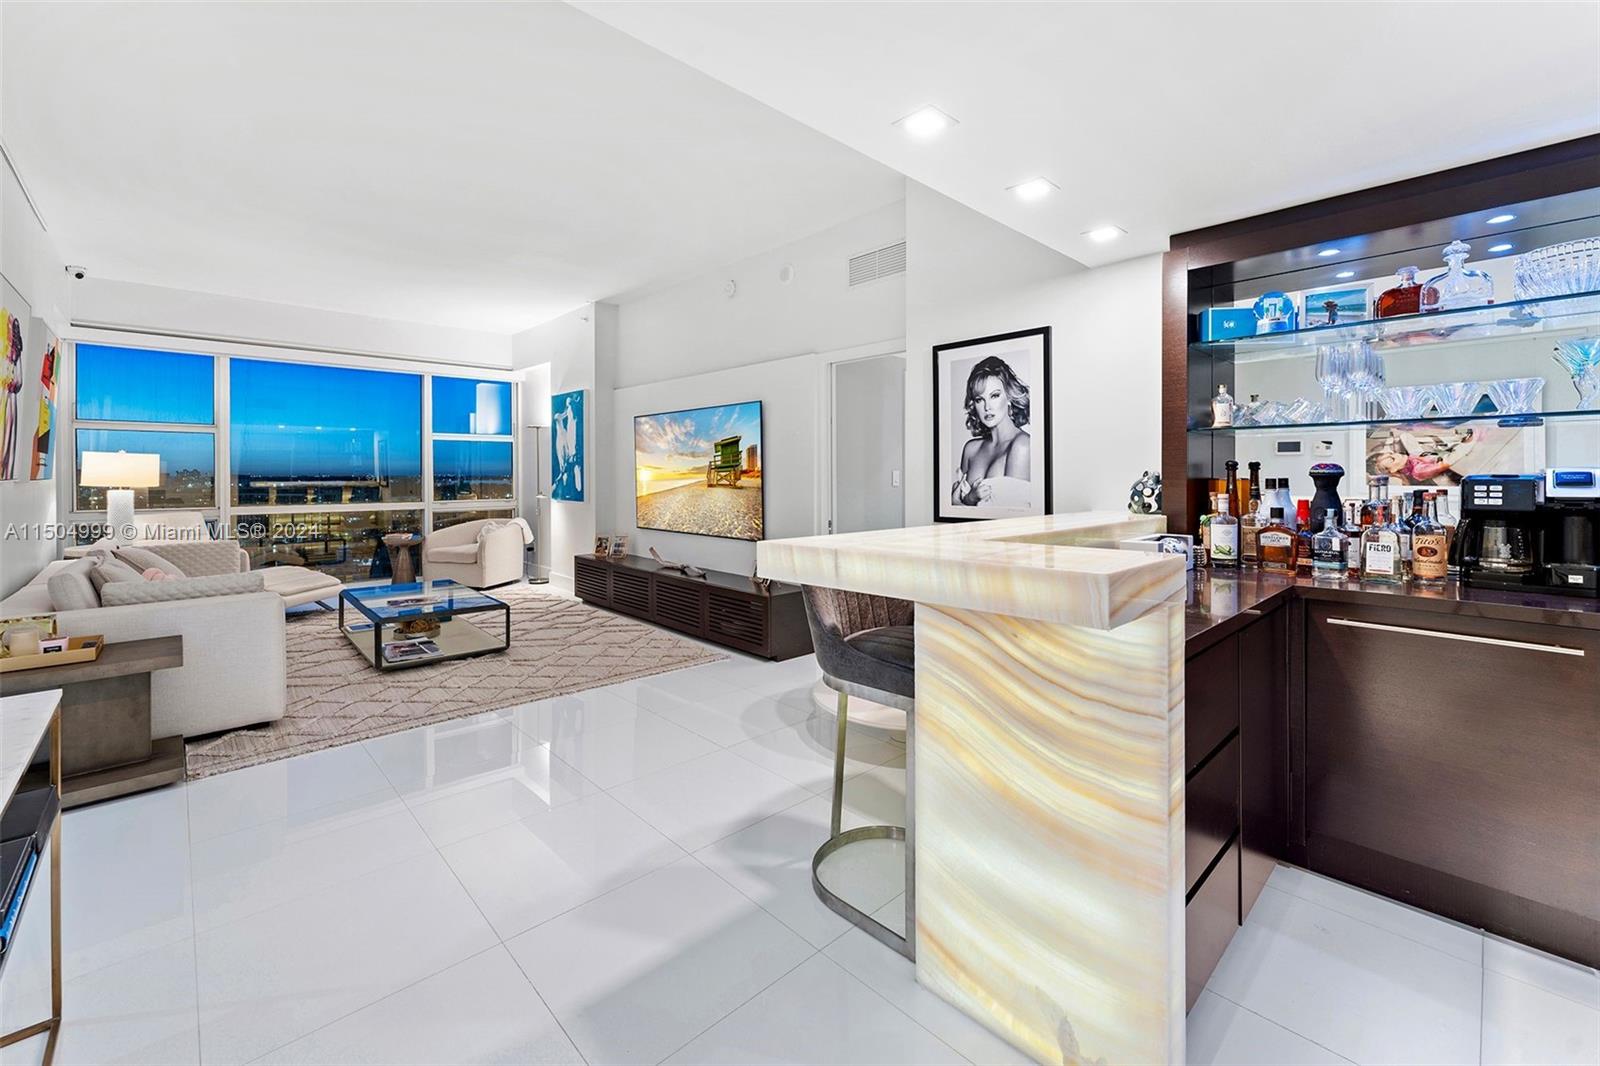 3/3 DOUBLE PENTHOUSE, one-of-a-kind unit w/ sweeping ocean, intercoastal, skyline & pool views w/ high end details, curated art collection, 2 primary suites, 2 separate living spaces, open concept kitchen w/ wine cooler, white onyx full bar w/lighting, tons of custom built-ins for storage. Exquisitely appointed, for entertaining & luxuriating. Experience Penthouse living at the Carillon, rated #1 Wellness property by Conde Nast. 100's classes/week, 70,000 SF Fitness/Spa, hydrotherapy, sauna, steam, regenerative medicine, salon, Fitness, PT & wellness staff, 4 pools, 2 Pilates Studios, water fitness, Gyrotonics, Barre, Zumba, TRX, concierge, Michelin pop-up restaurant on-site, juice bar, private beach w/food & towel service, 24-hr security, valet, boardwalk, bikes & gardens. TXT for Info